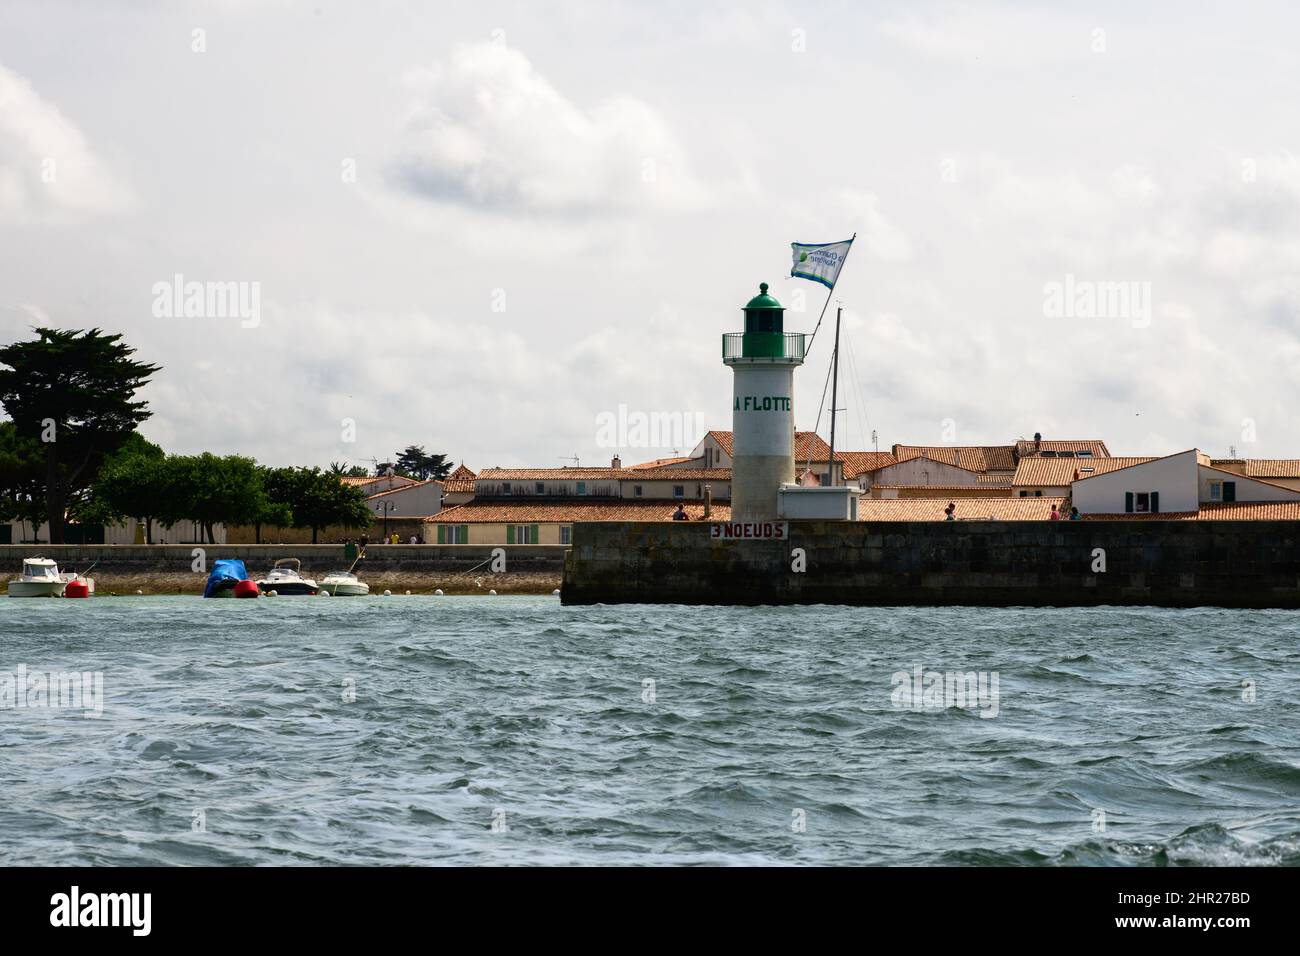 View on the lighthouse Phare de la Flotte and some boats from a boat on the sea on the isle ile de Ré in France during summertime Stock Photo